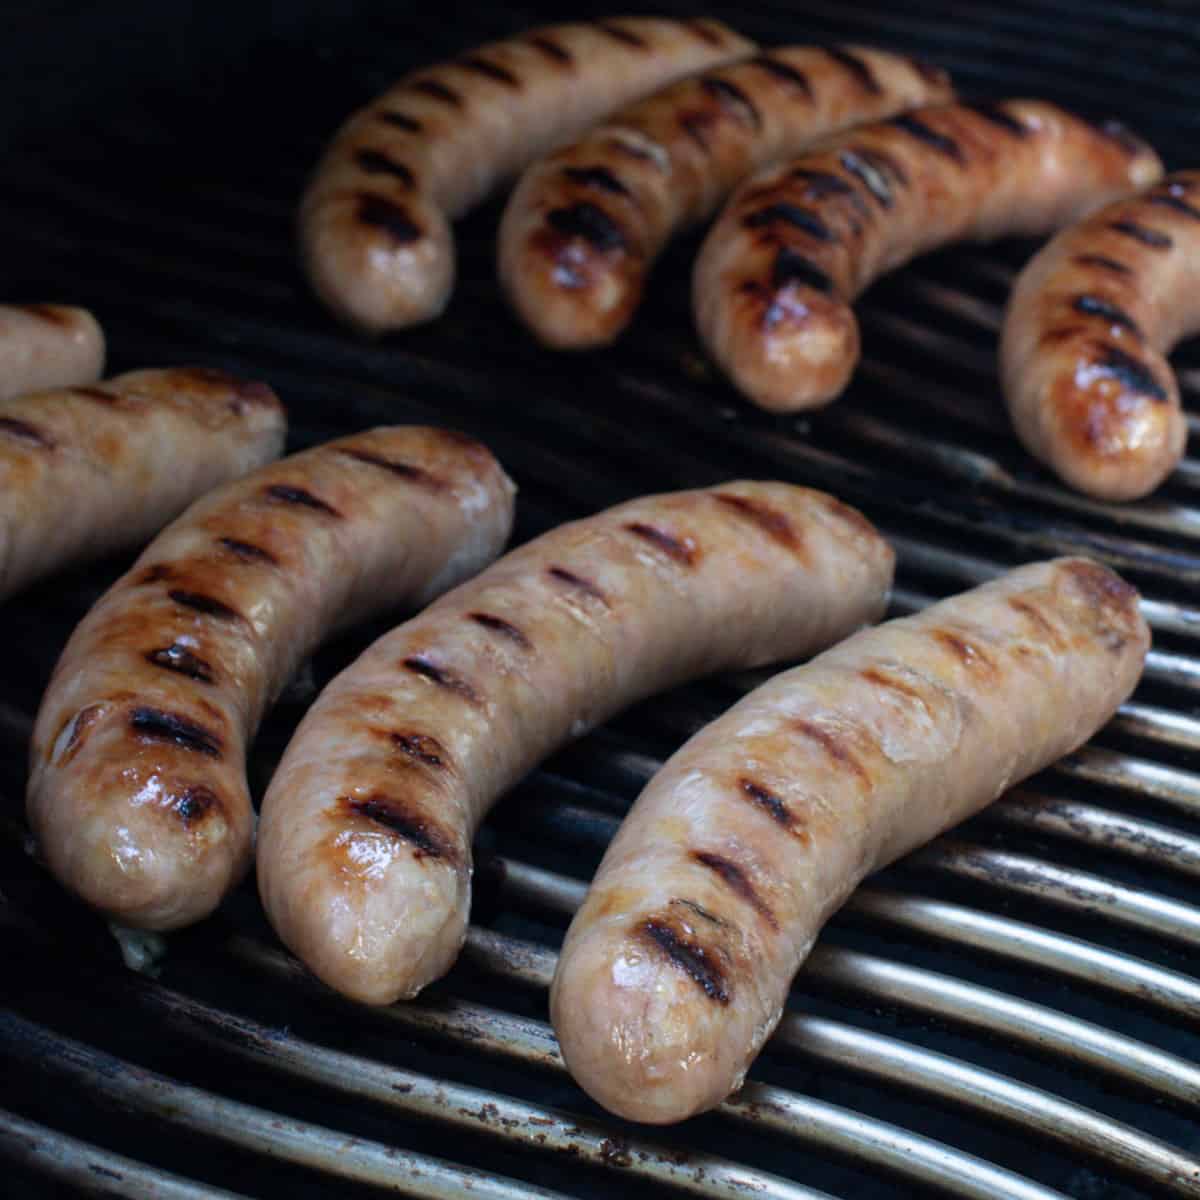 How to Grill Italian Sausages - The Black Peppercorn